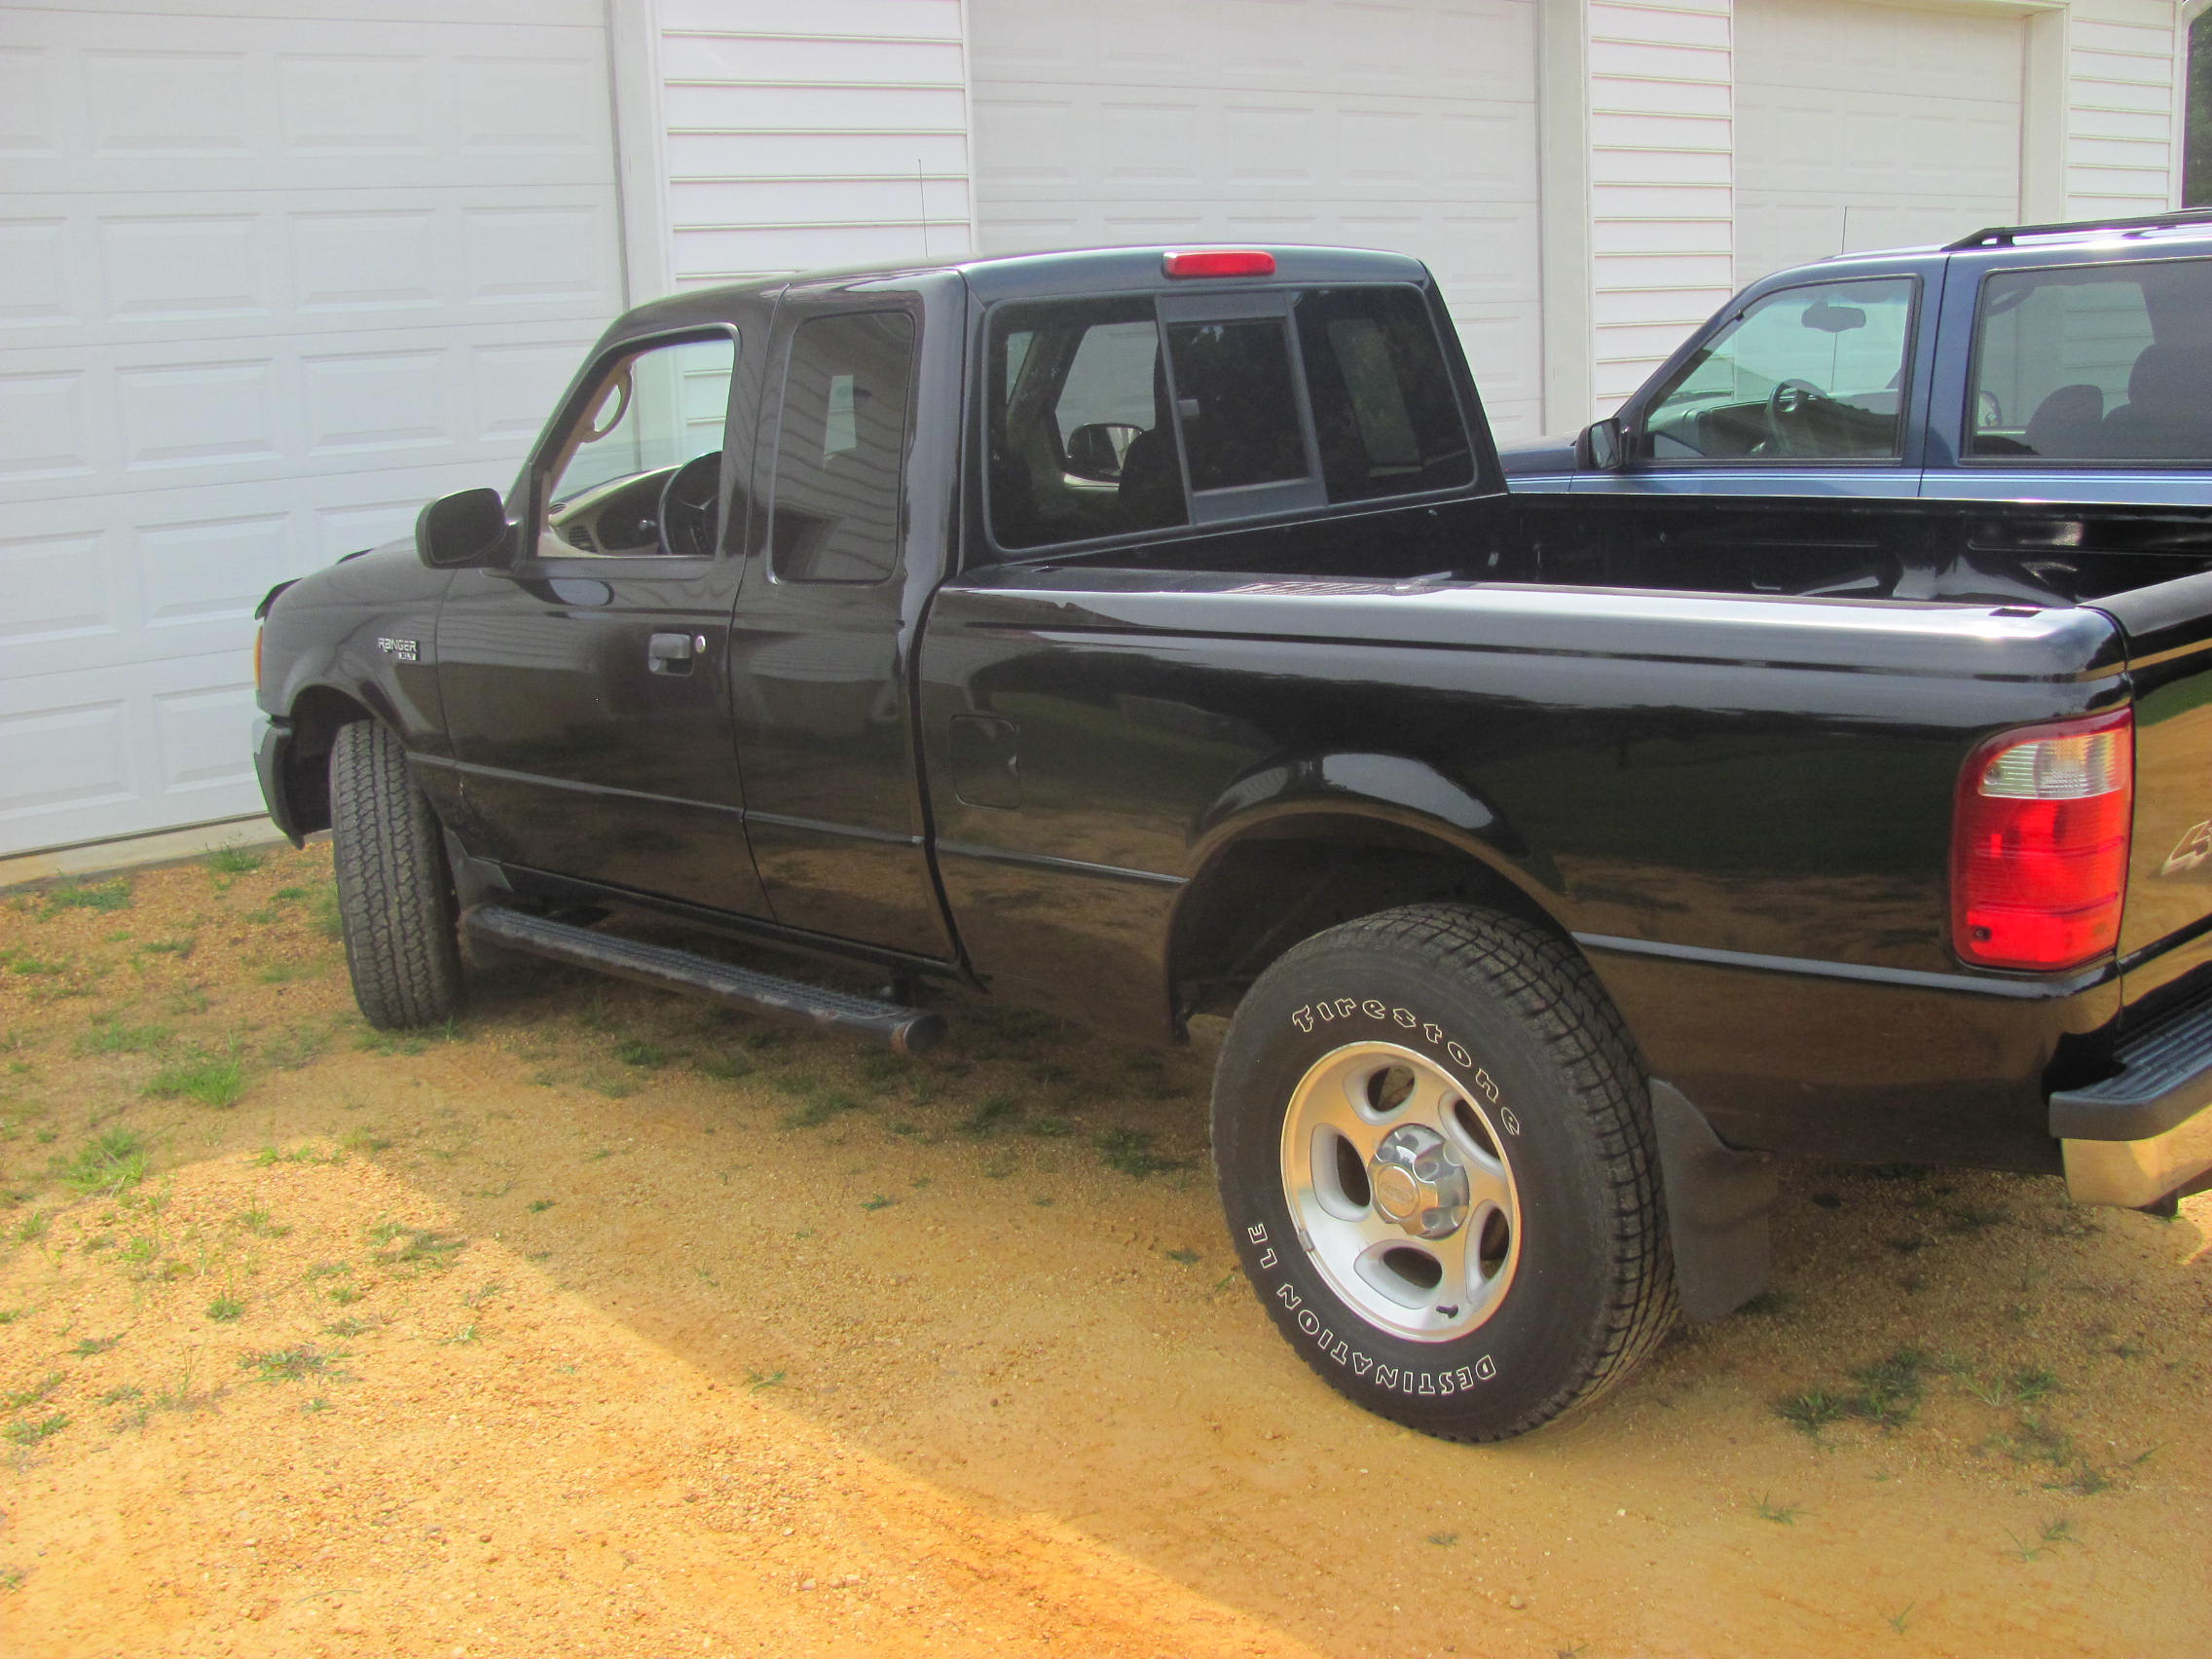 Ford Ranger bed floor replacement - Ford Truck Enthusiasts Forums